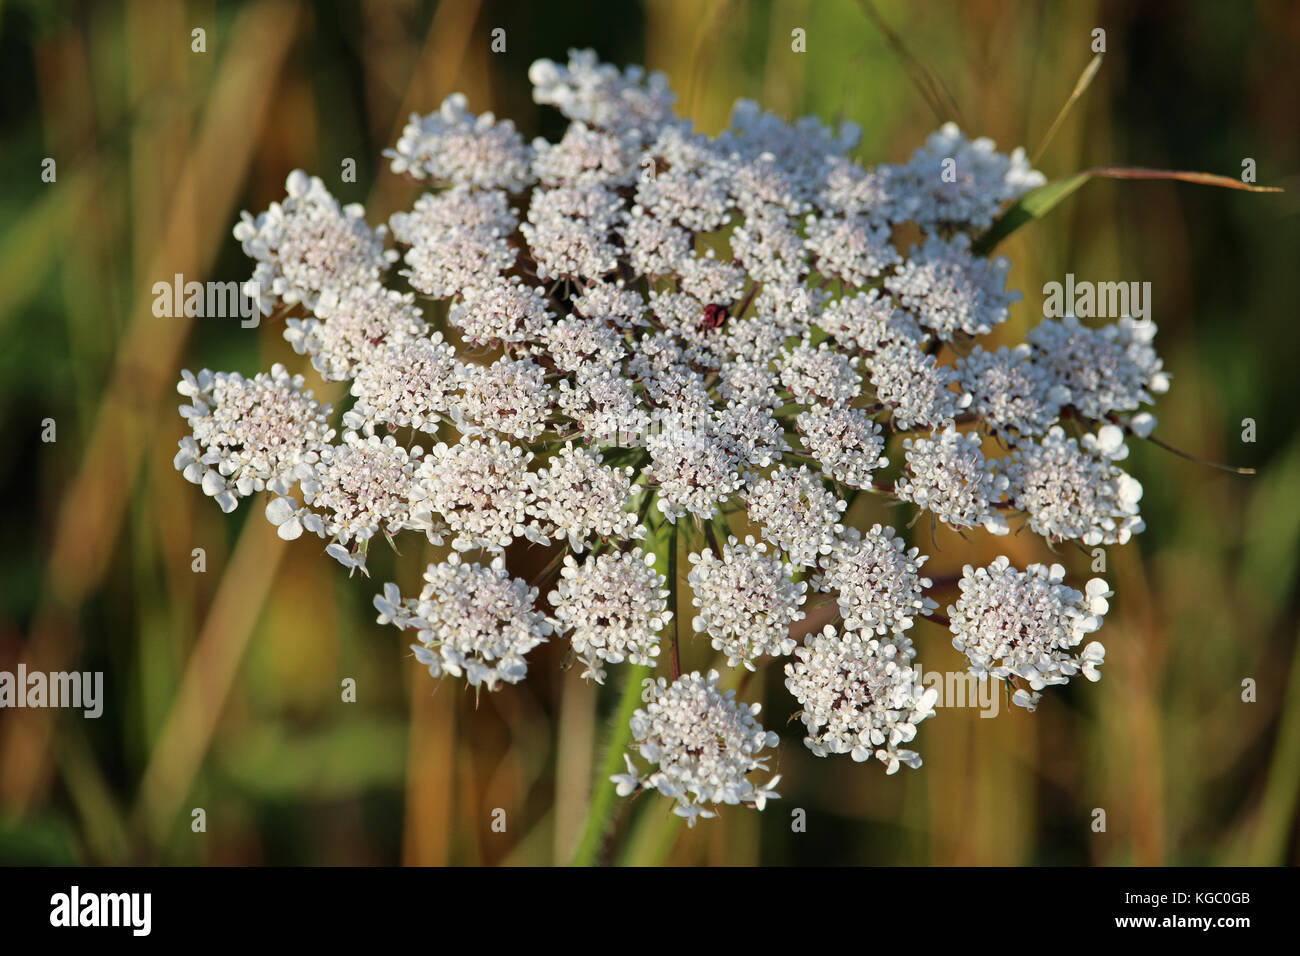 Close view from above of an umbel of wild carrot (Daucus carota) flowers. Background of blurred vegetation. Stock Photo